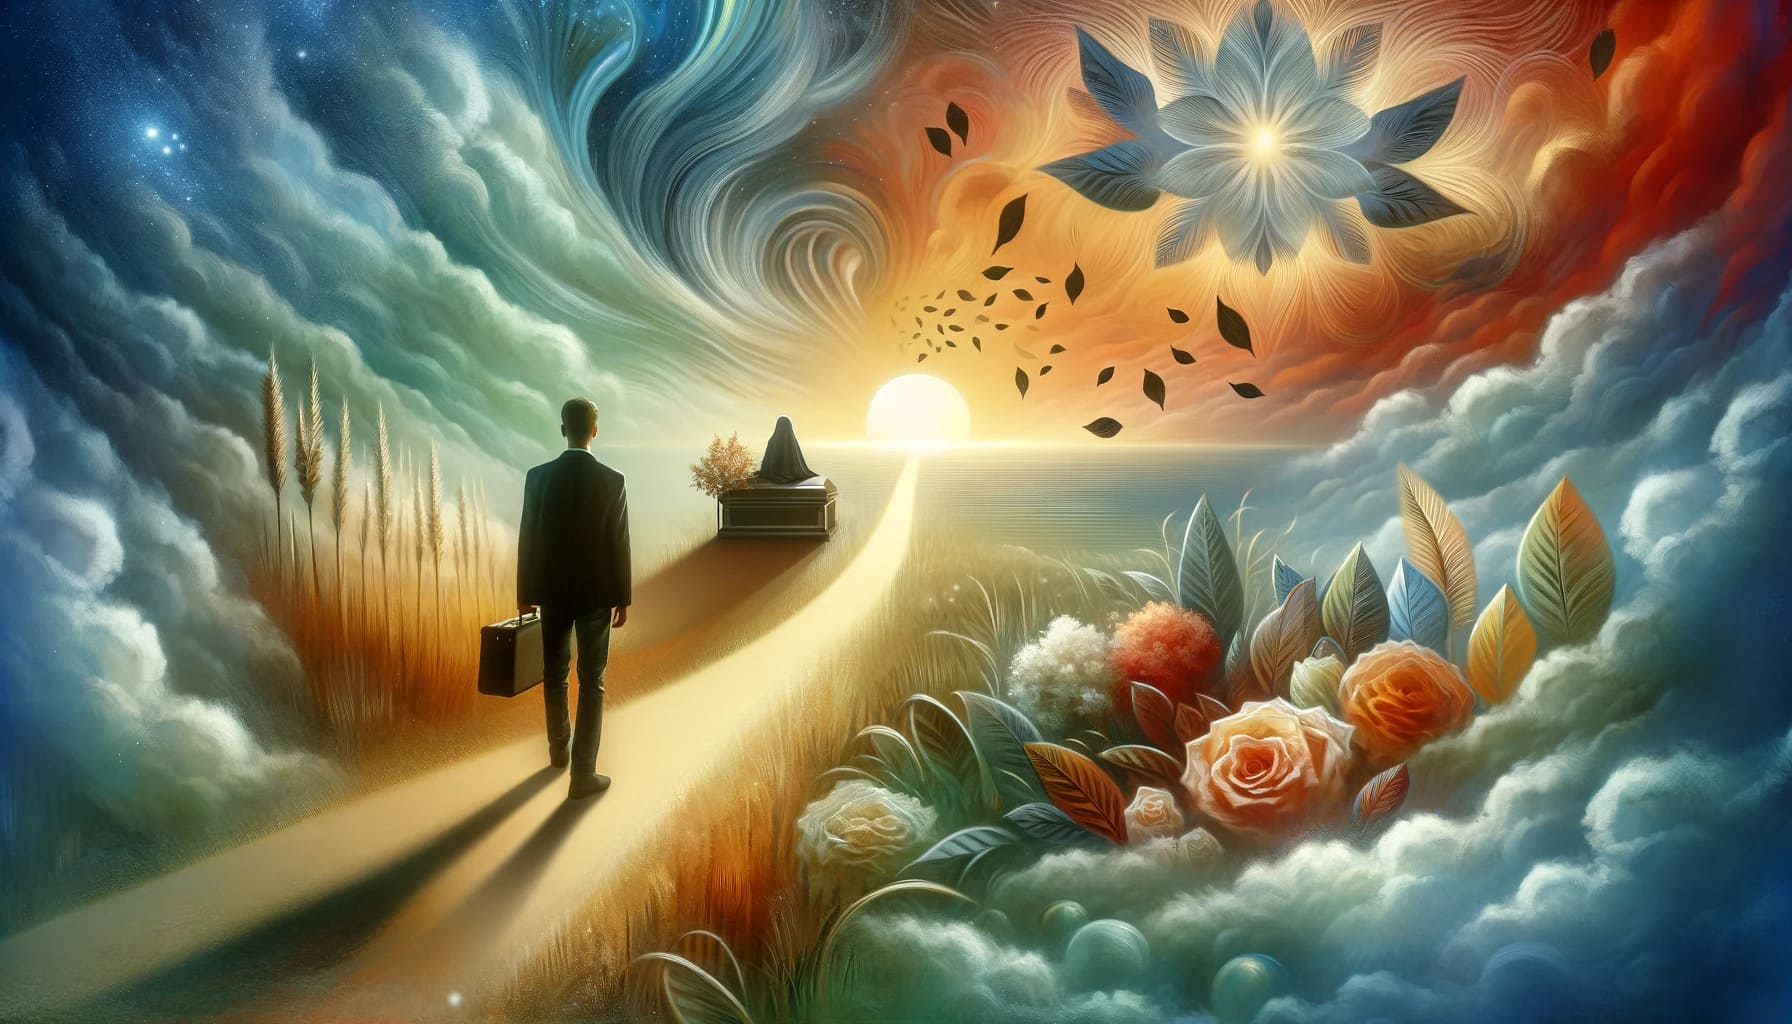 A symbolic dream scene showing a person attending a funeral representing personal growth and spiritual awakening. The atmosphere is serene and intros